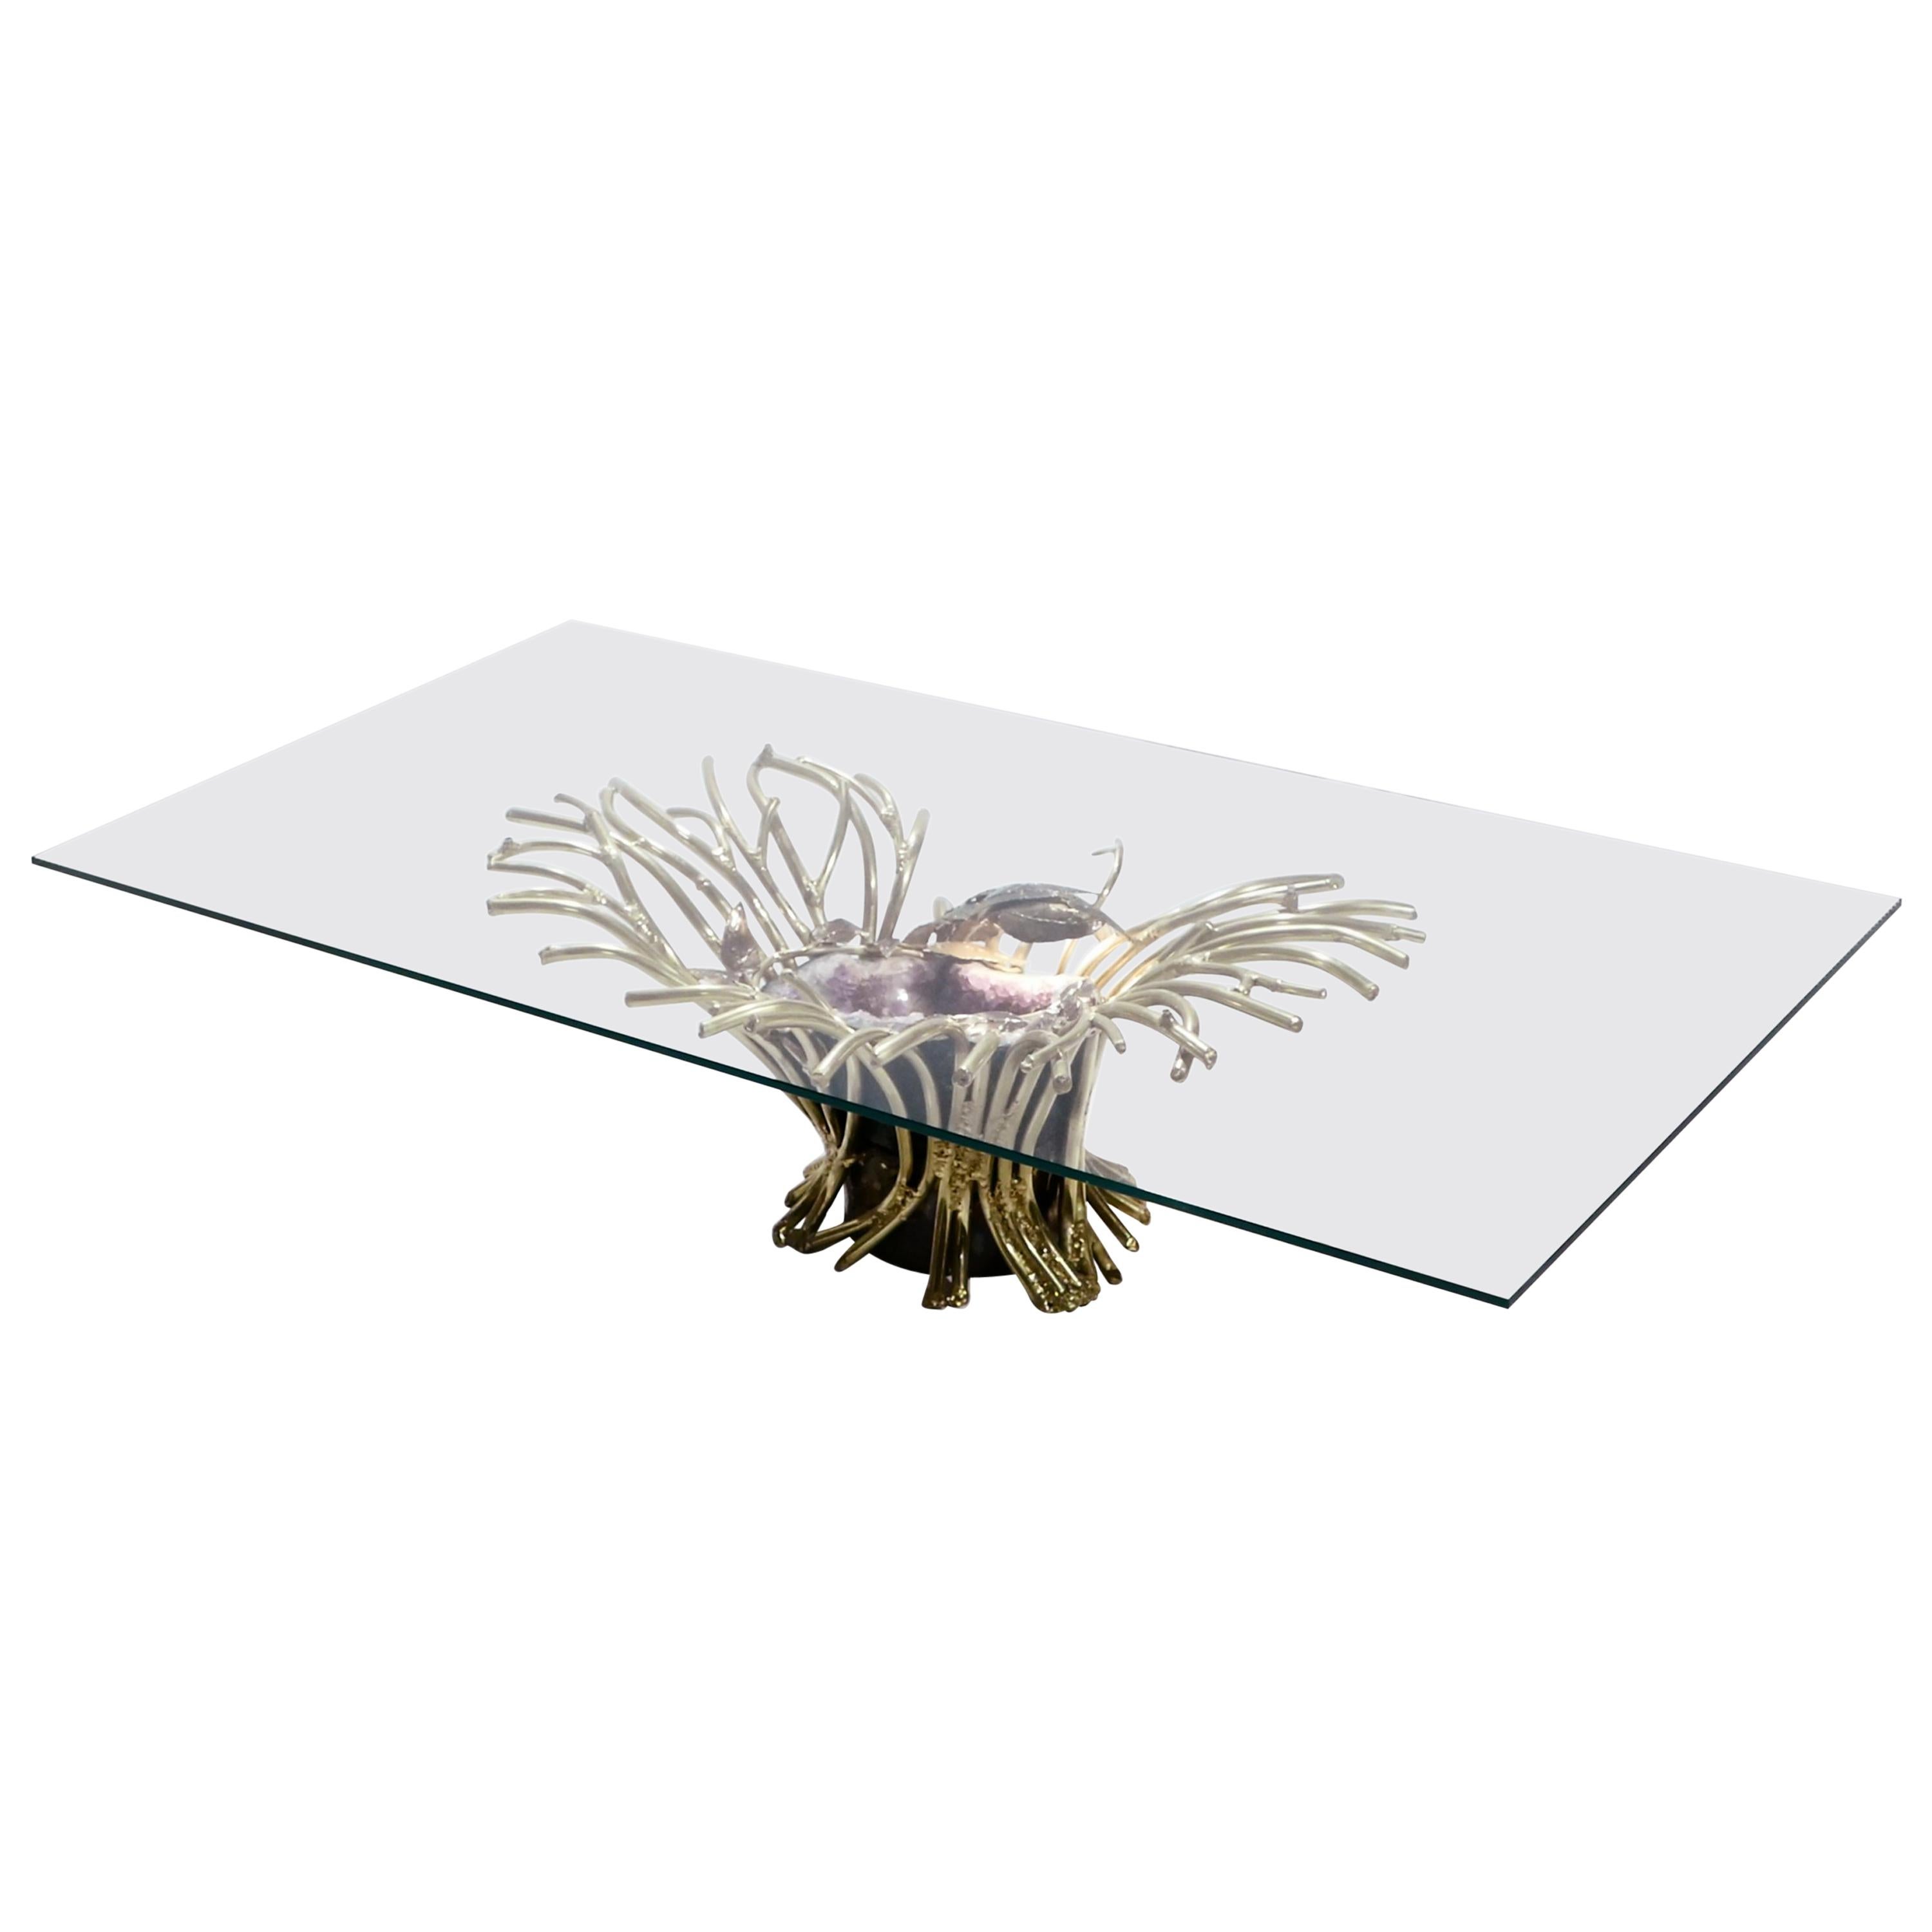 The creative design of this coffee table by Isabelle Faure is breathtaking. Tangled in a web of heavy brass “branches” is a monstrous amethyst geode, lit from the inside. This sculpture forms the base for a thick slab of transparent glass, a choice